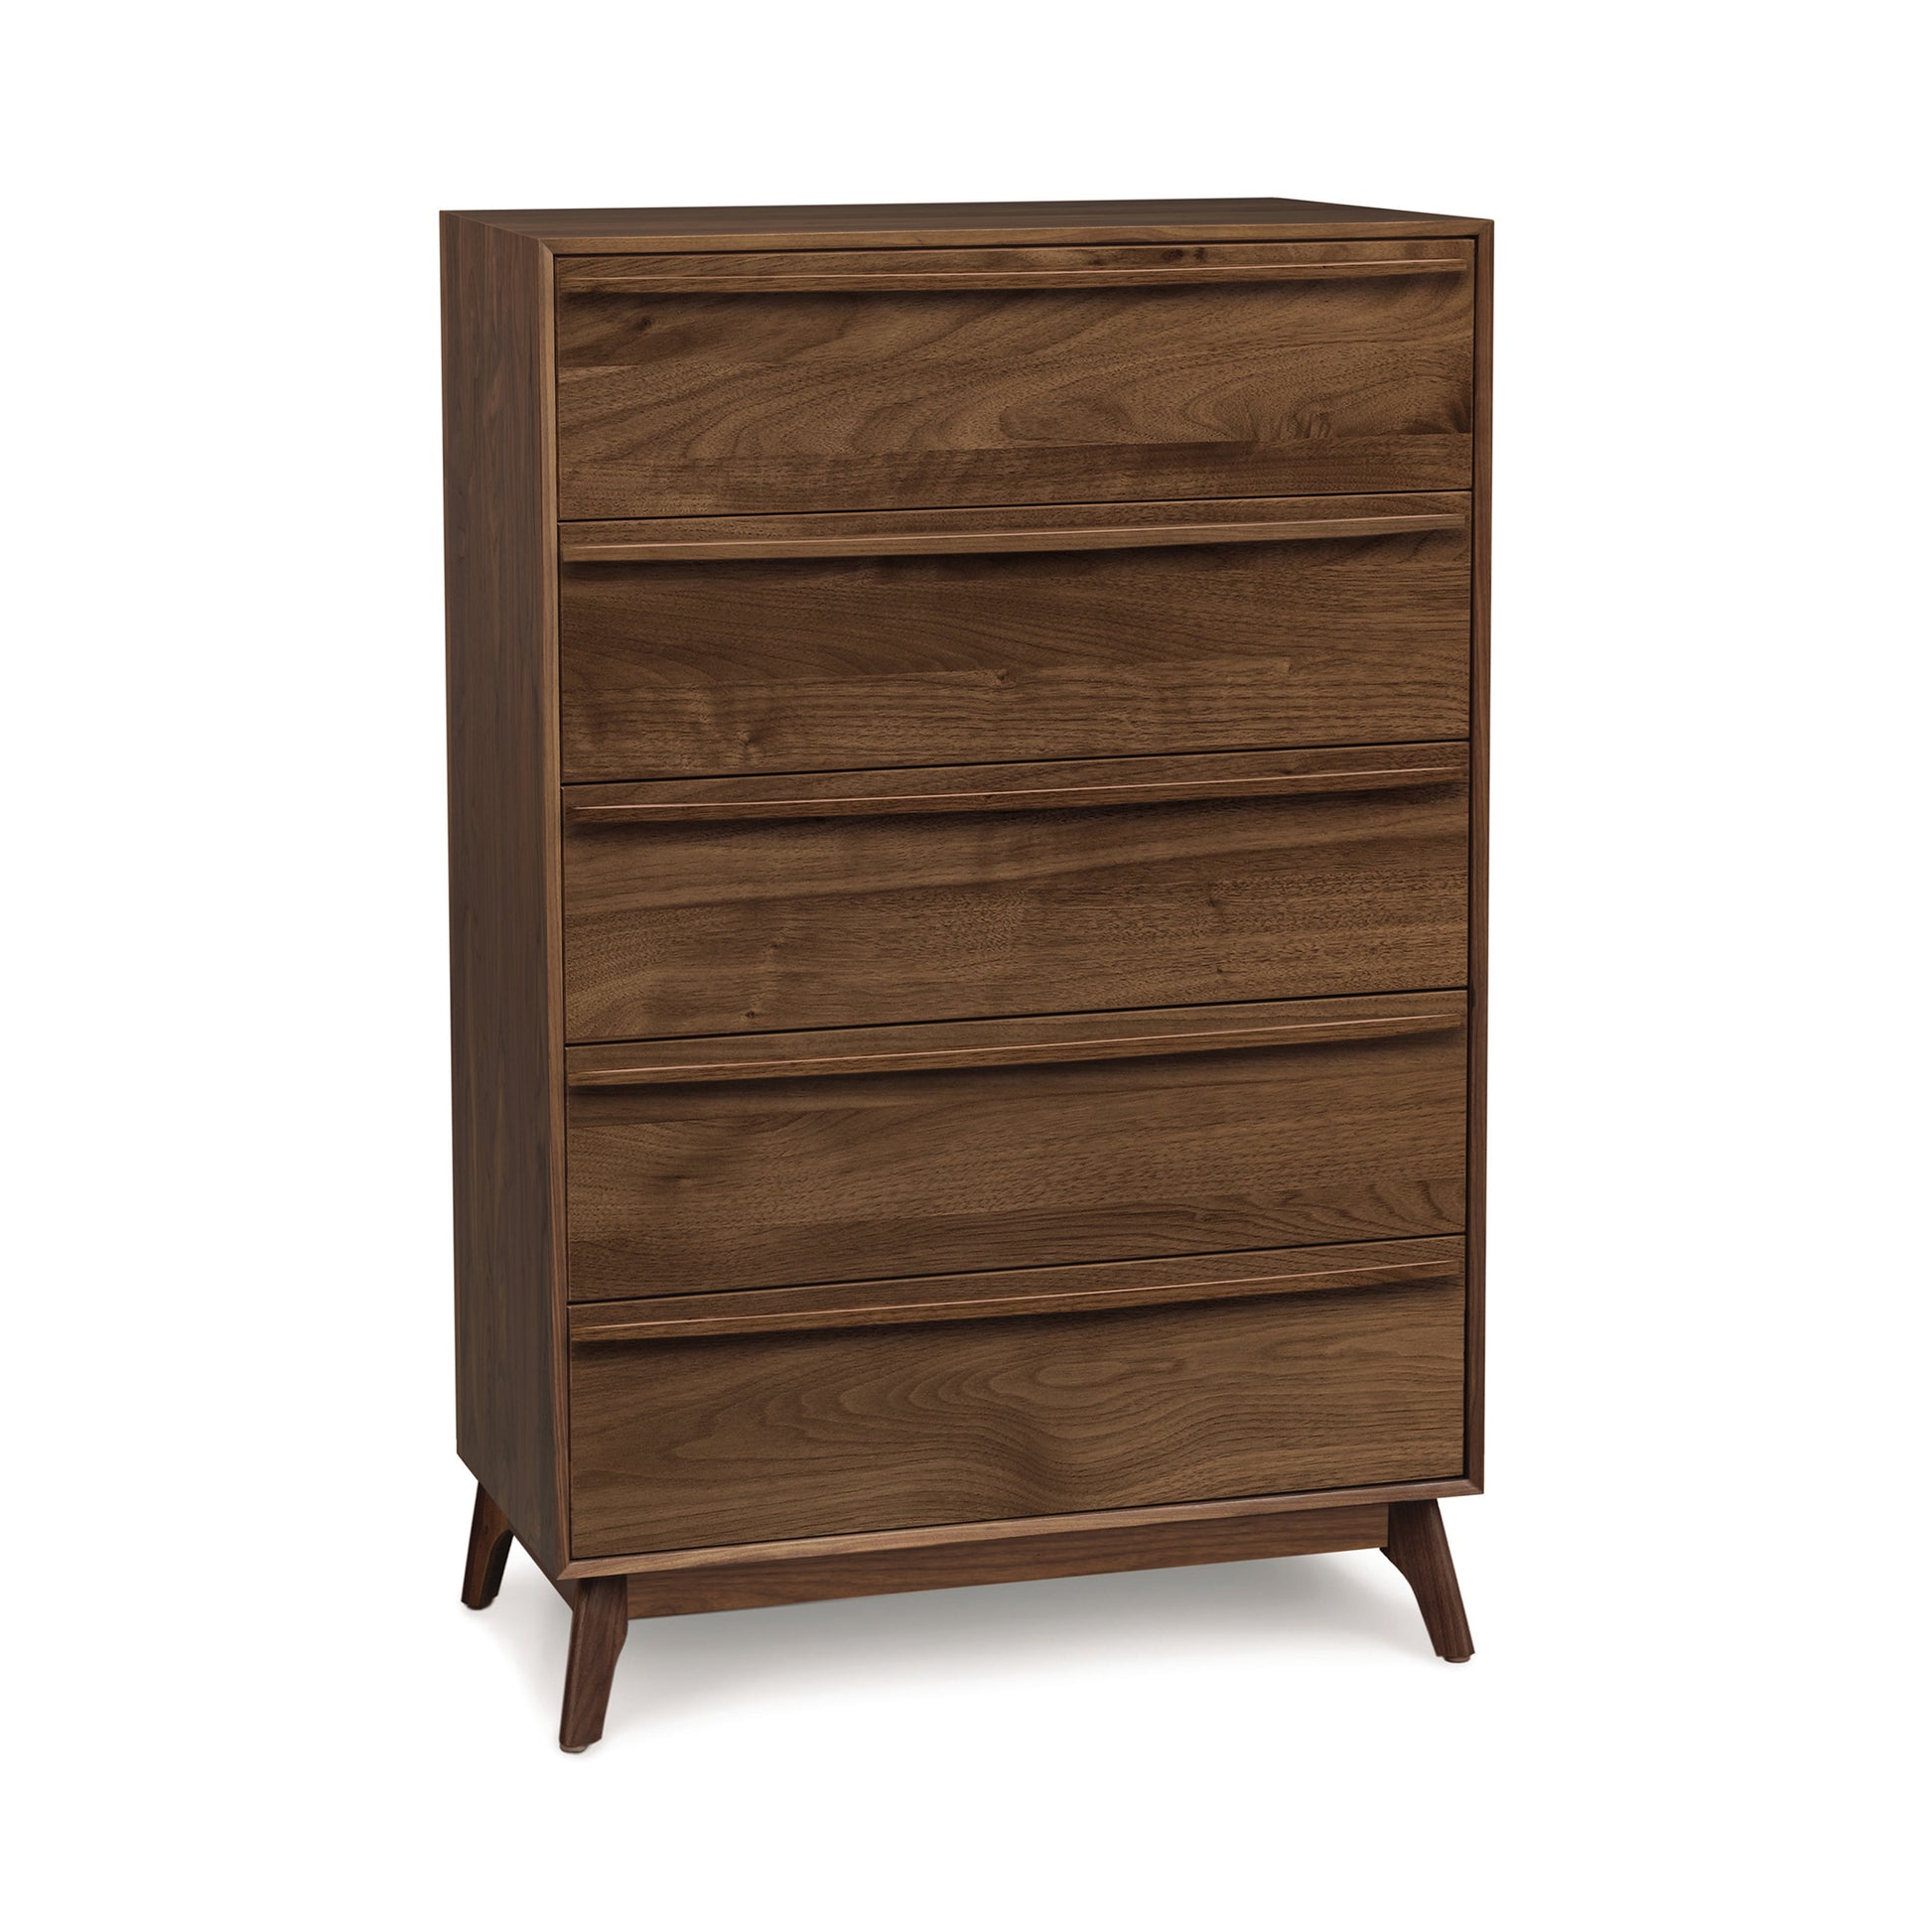 The Copeland Furniture Catalina 5-Drawer Wide Chest is a mid-century modern style bedroom chest with wooden legs.